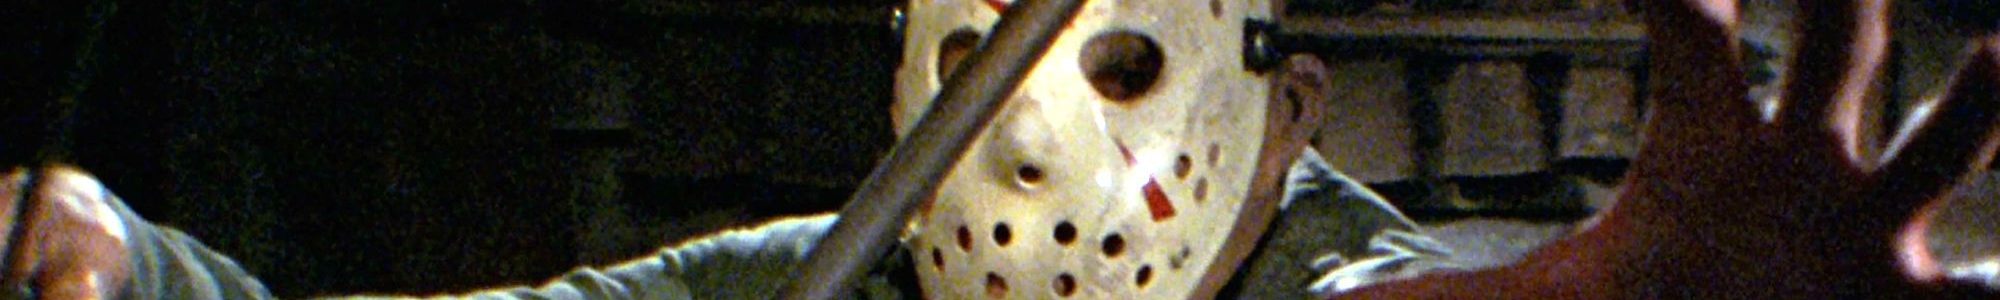 Friday-the-13th-Part-3-Ending-Jason-Gets-an-Axe-to-the-Head